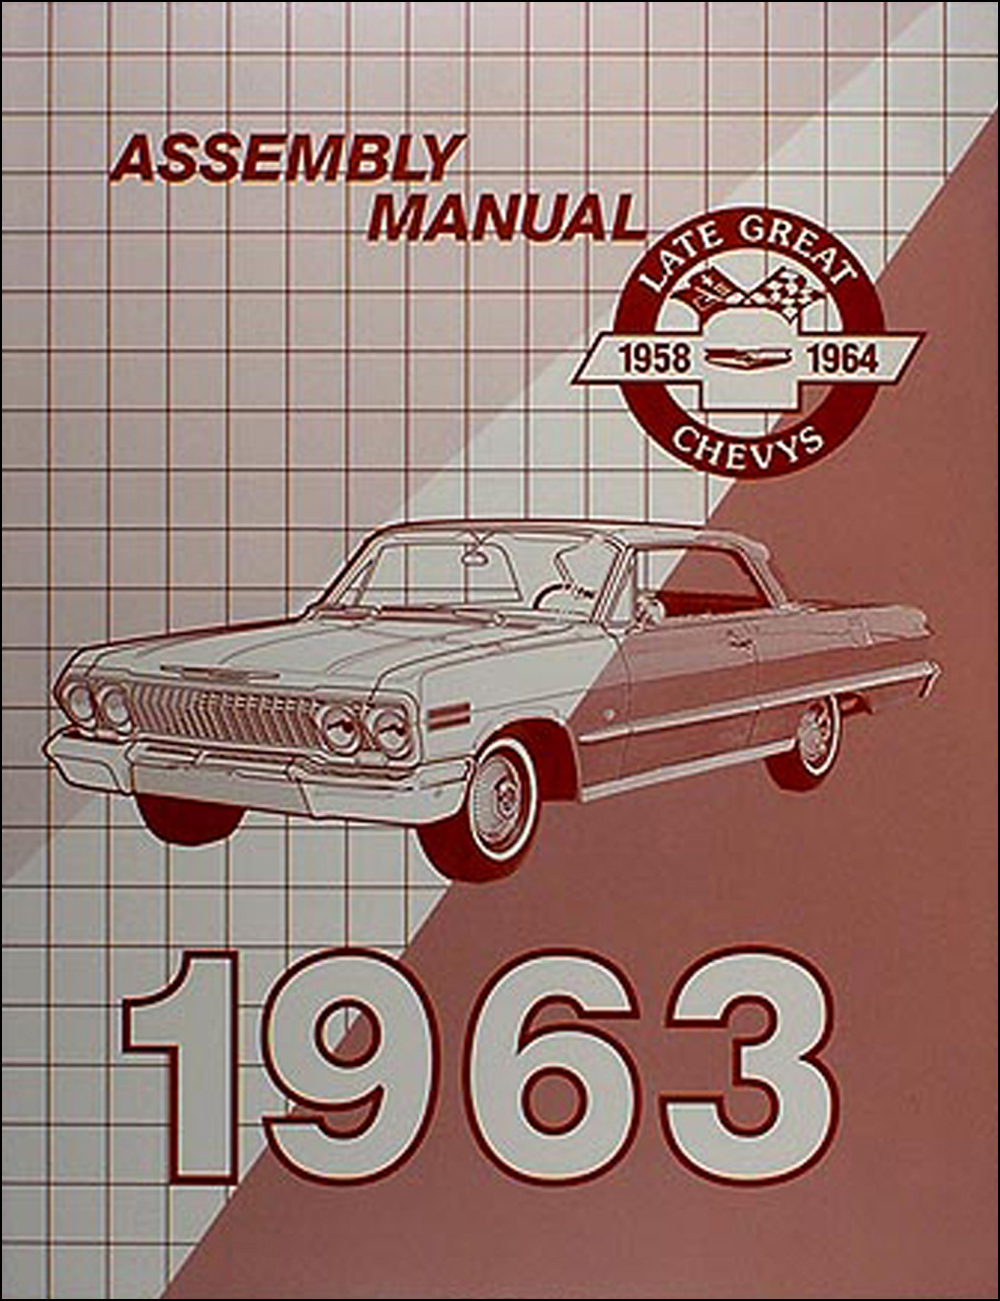 1963 Chevrolet Assembly Manual Reprint -- Biscayne Bel Air Impala, SS